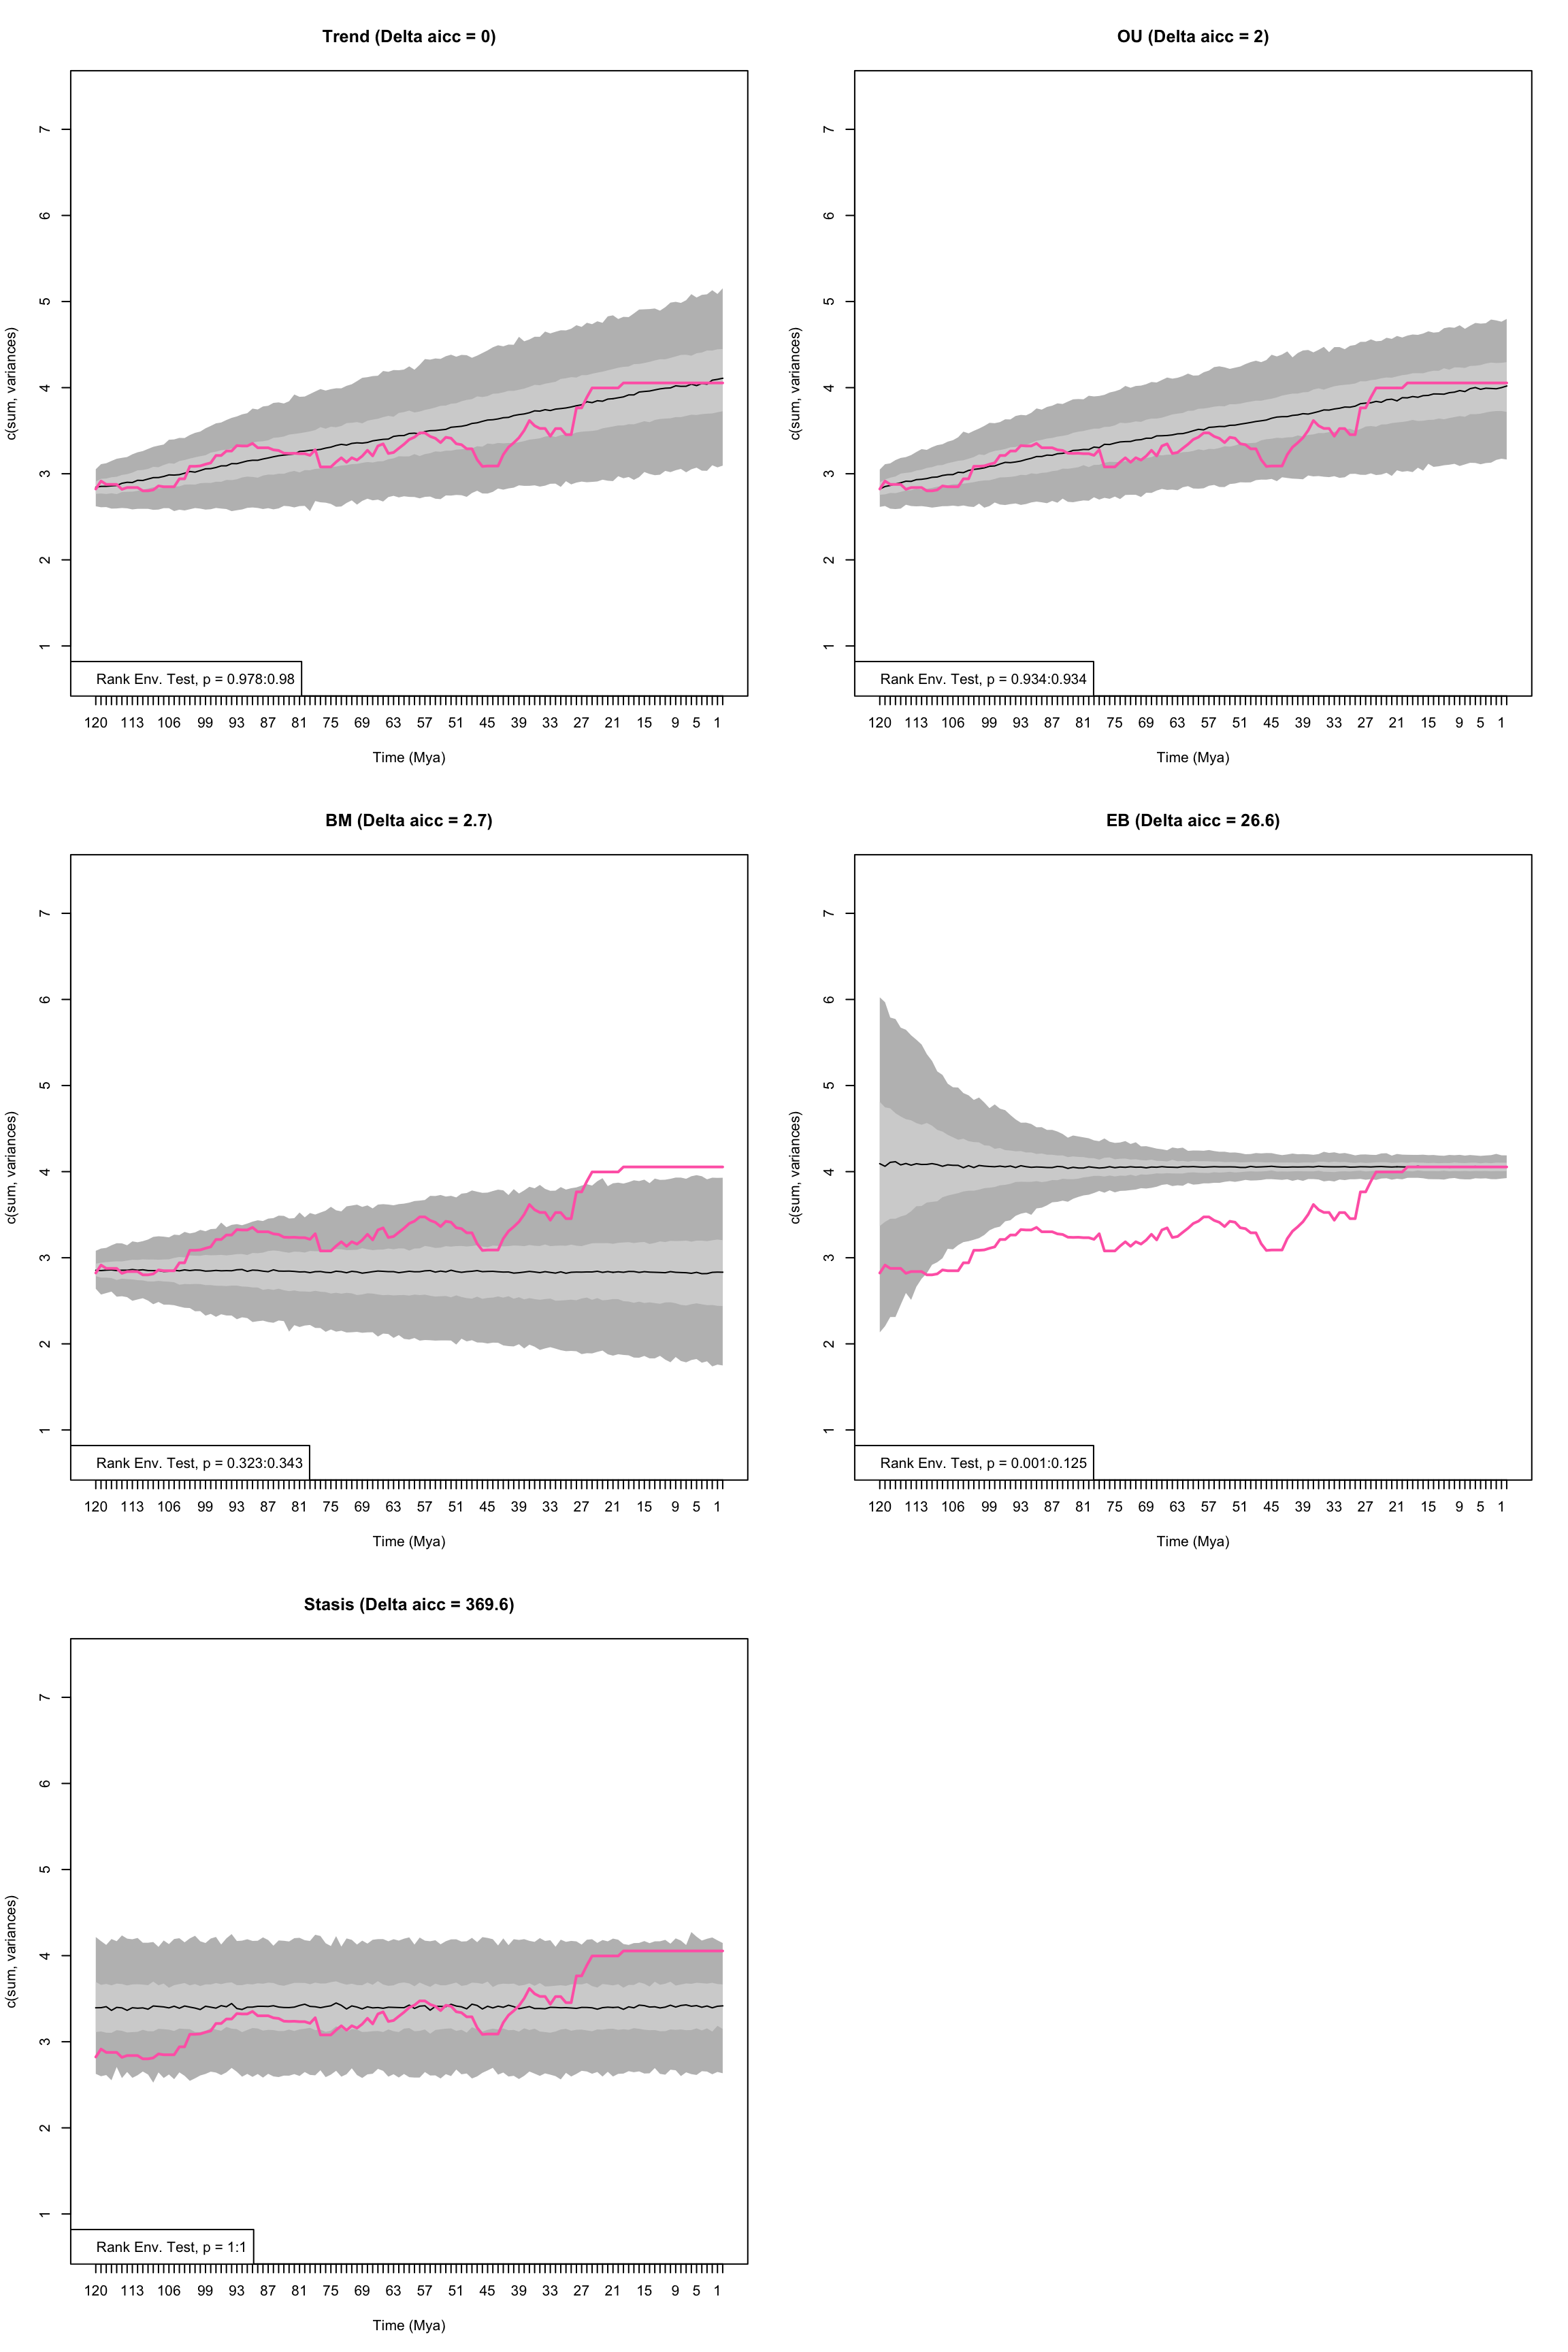 Empirical disparity through time (pink), simulate data based on estimated model parameters (grey), delta AICc, and range of p values from the Rank Envelope test for Trend, OU, BM, EB, and Stasis models